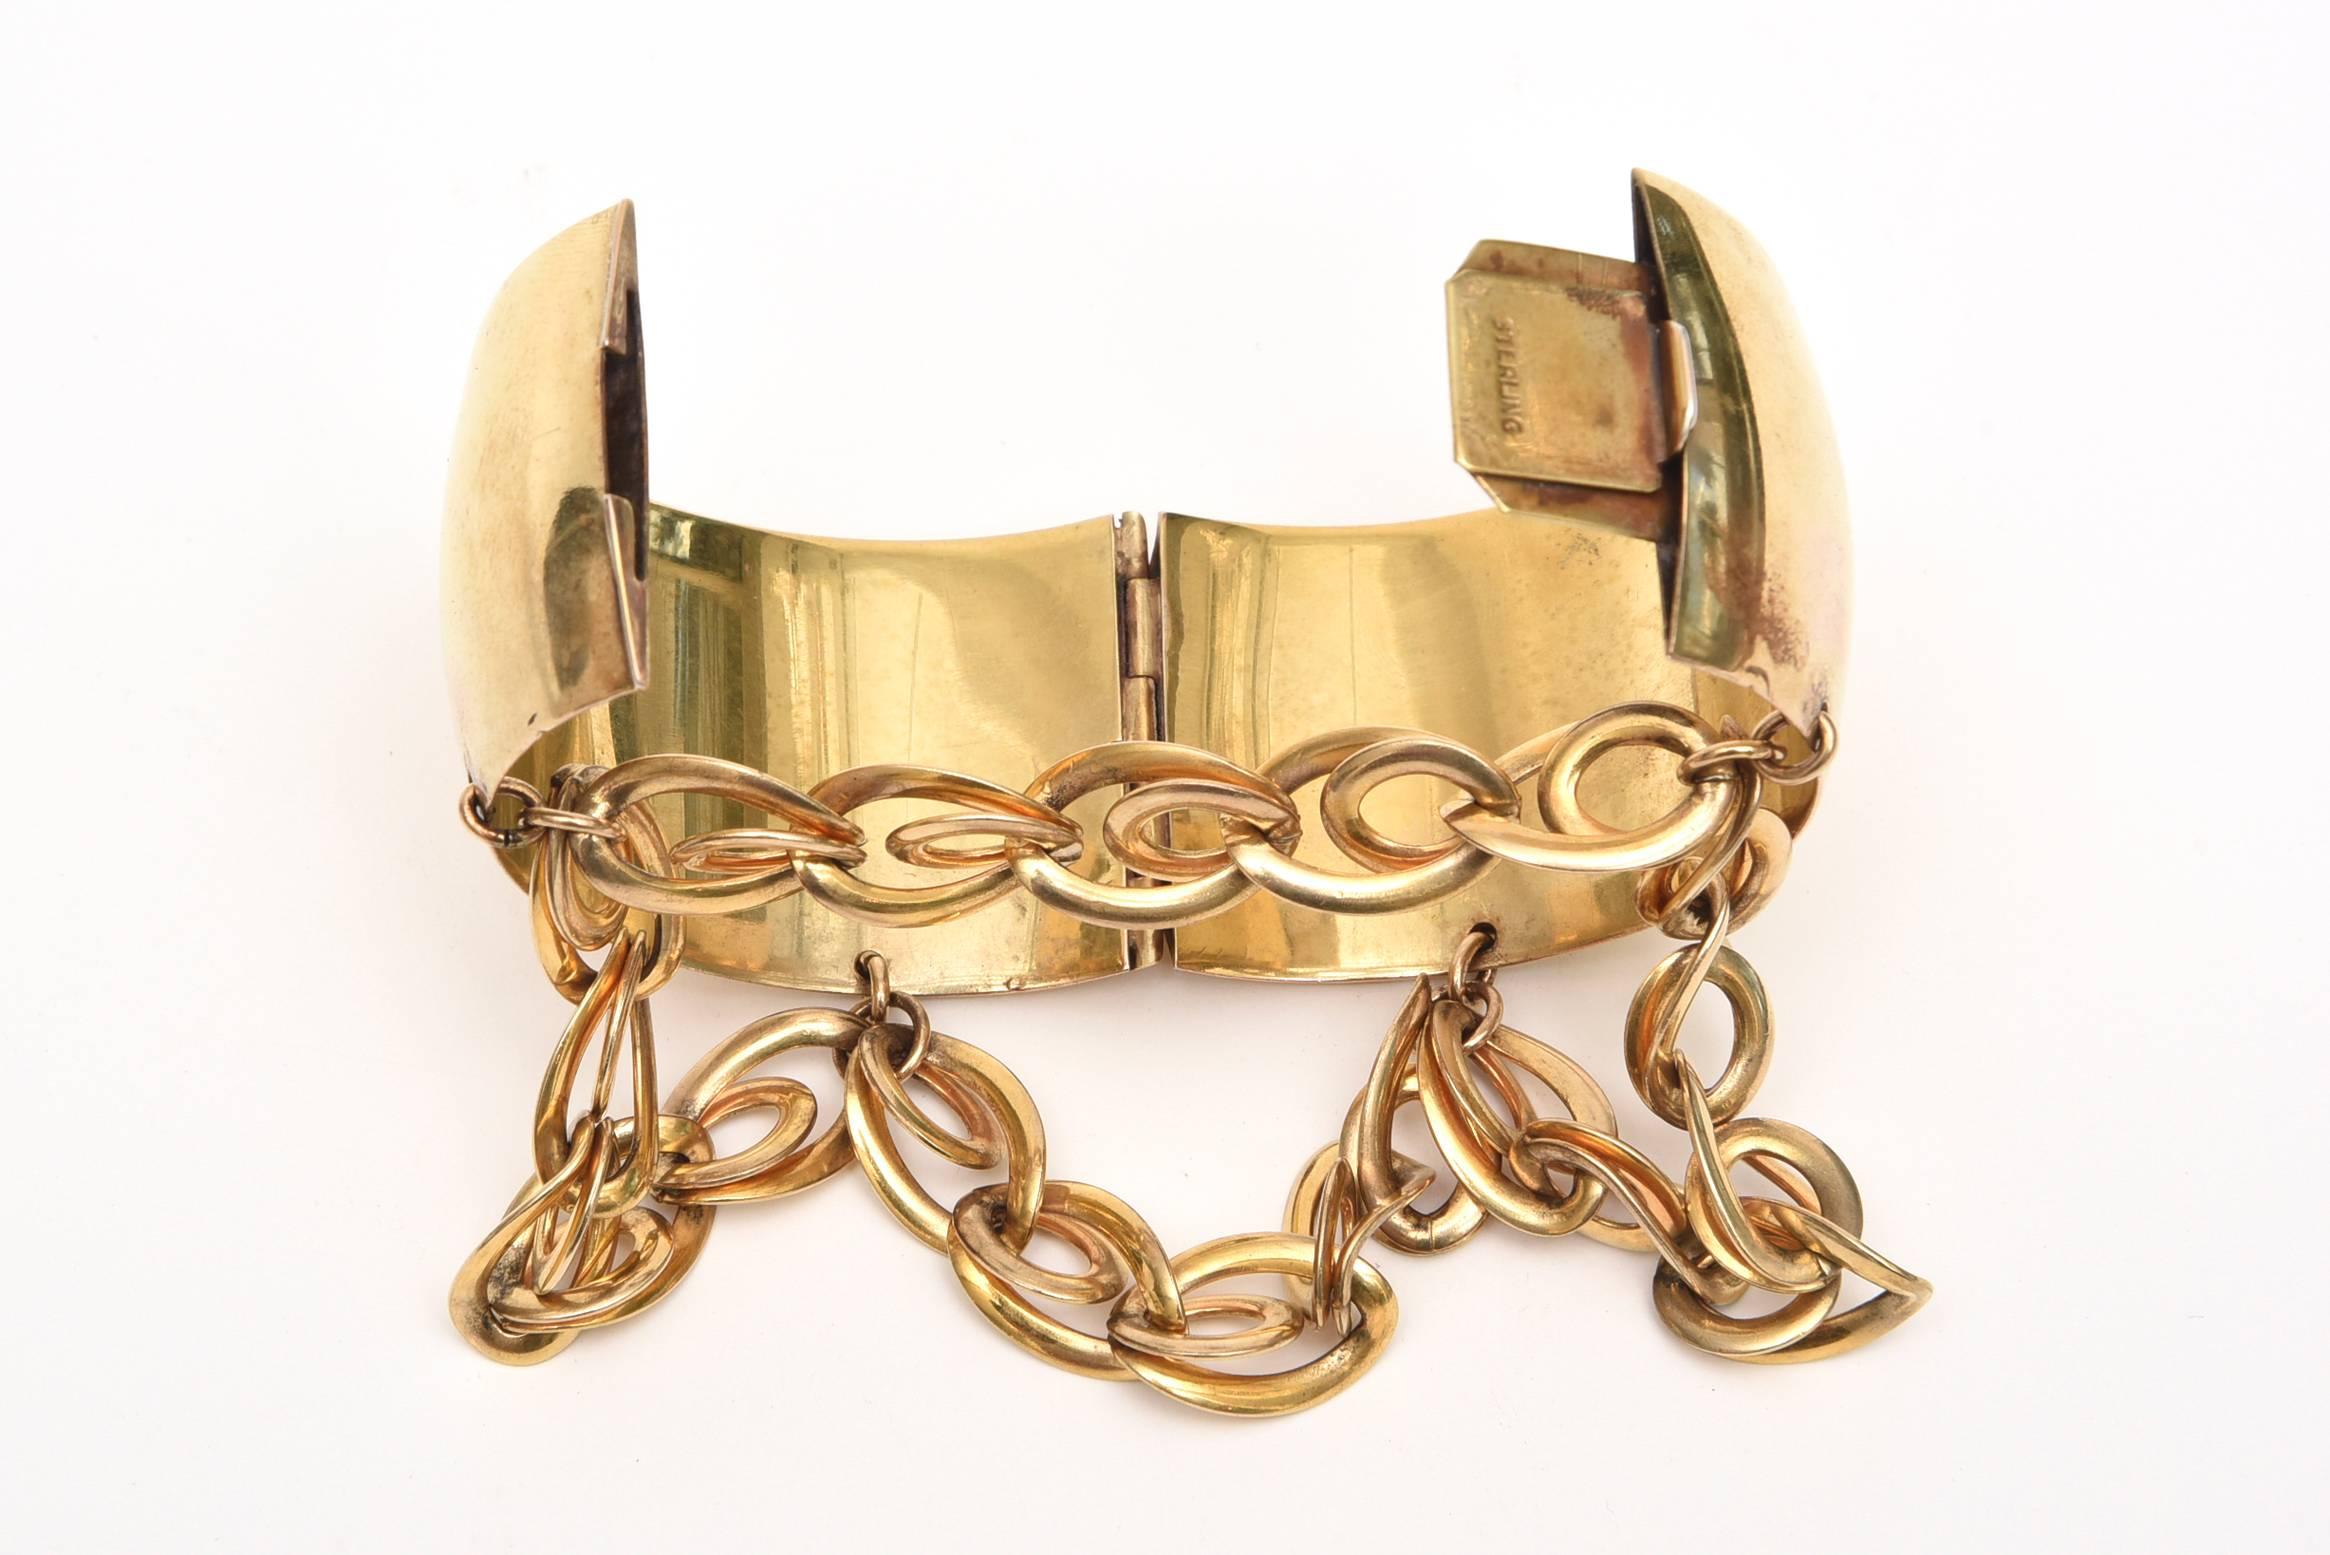 Modern Gold Wash over Sterling Silver Cuff Bracelet with Dangling Link Chain /SALE